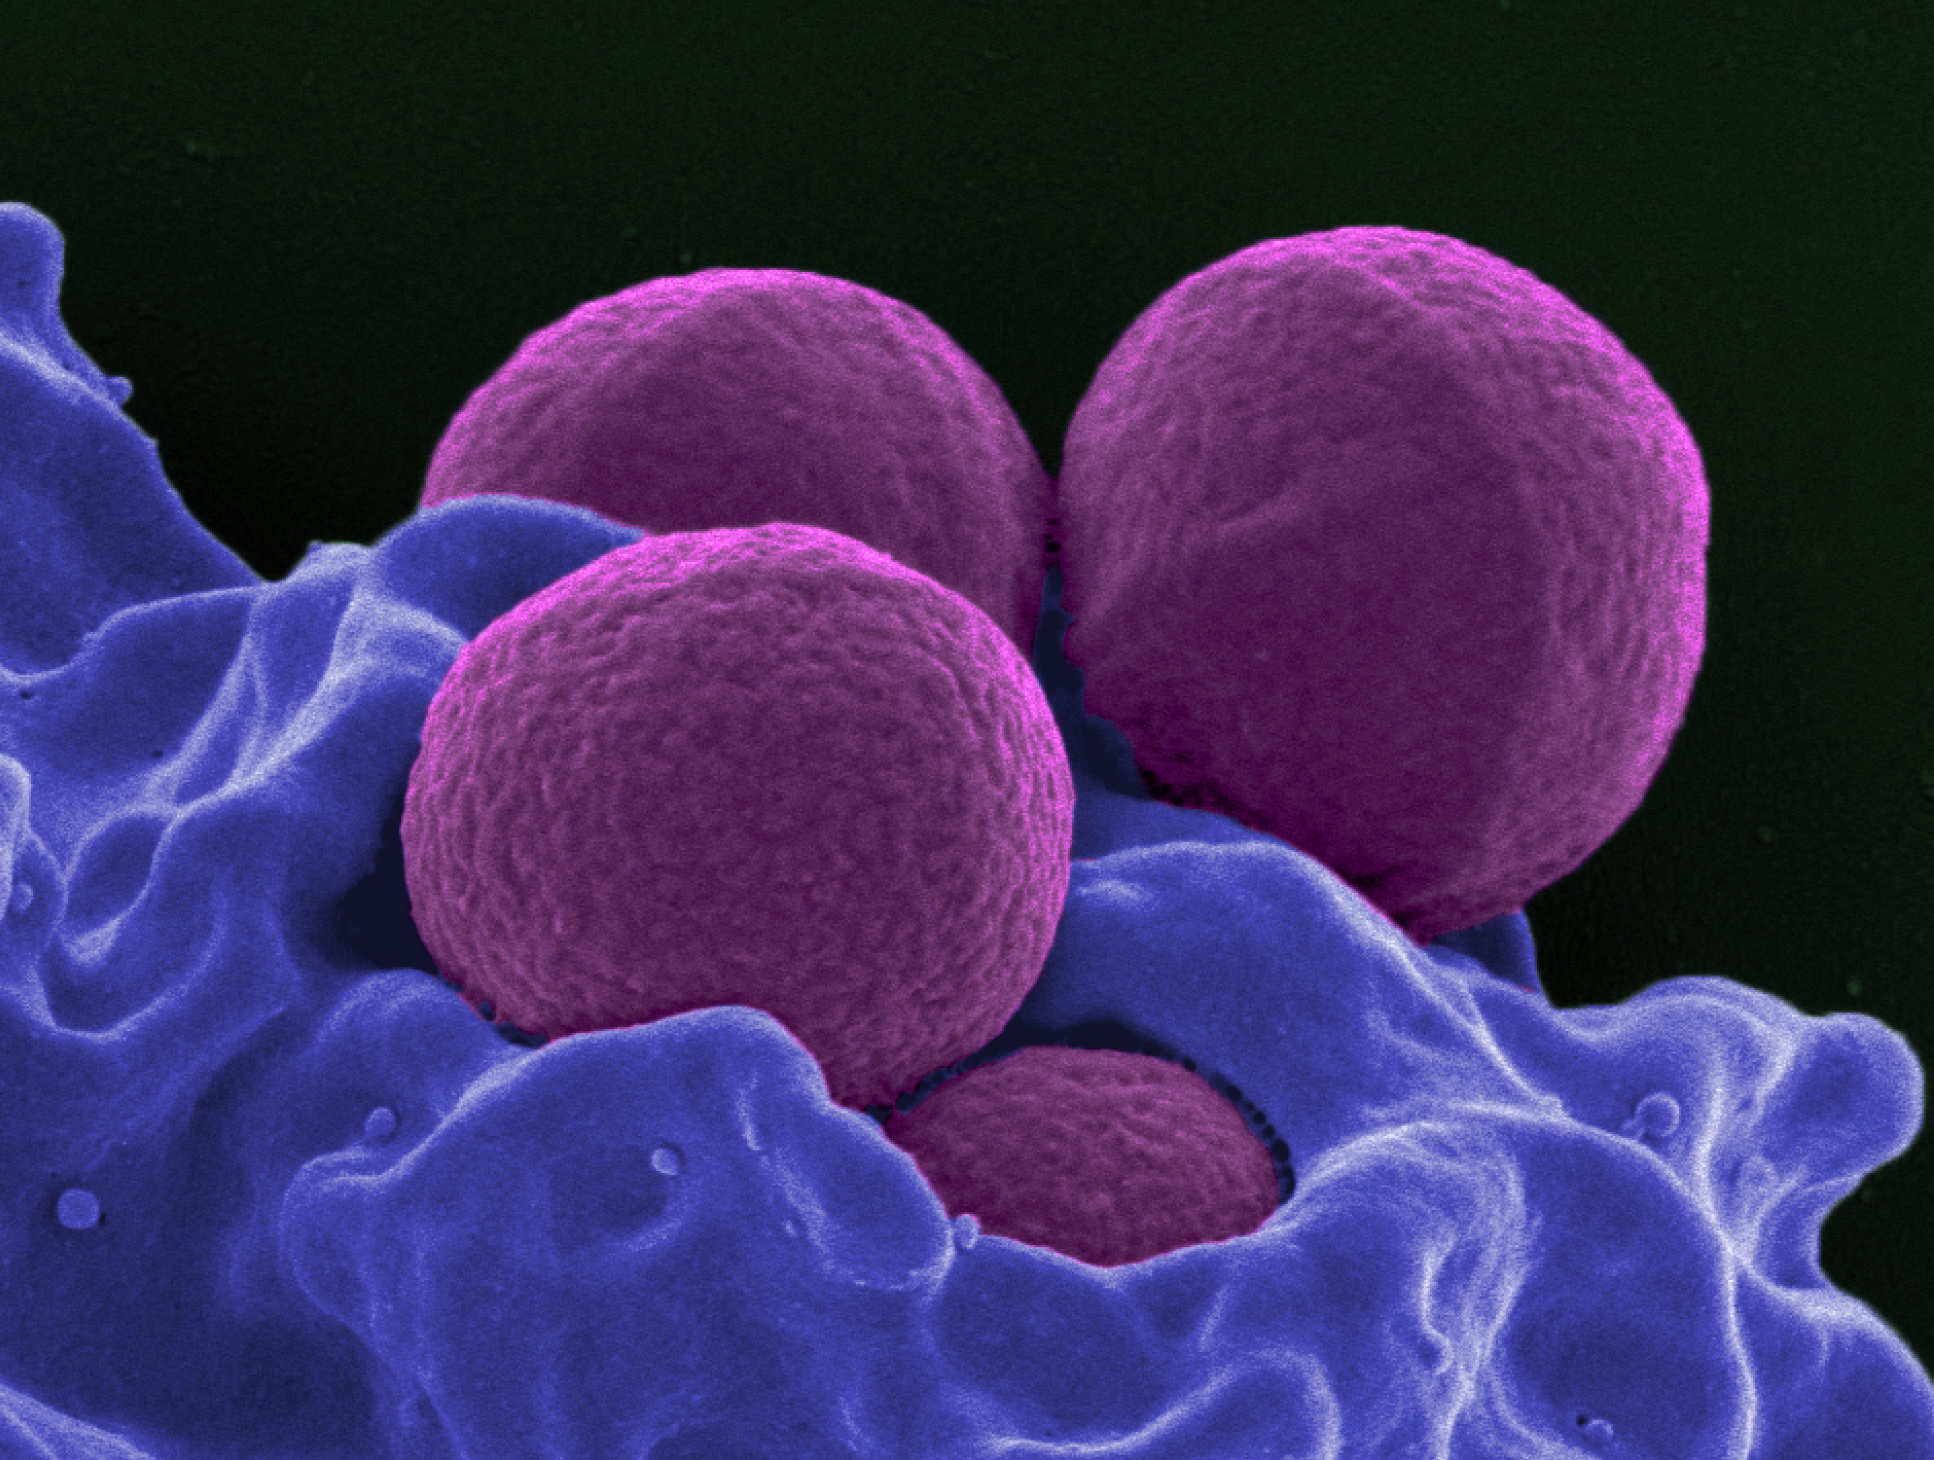 MRSA is just one of a growing number of bugs resistant to antibiotics